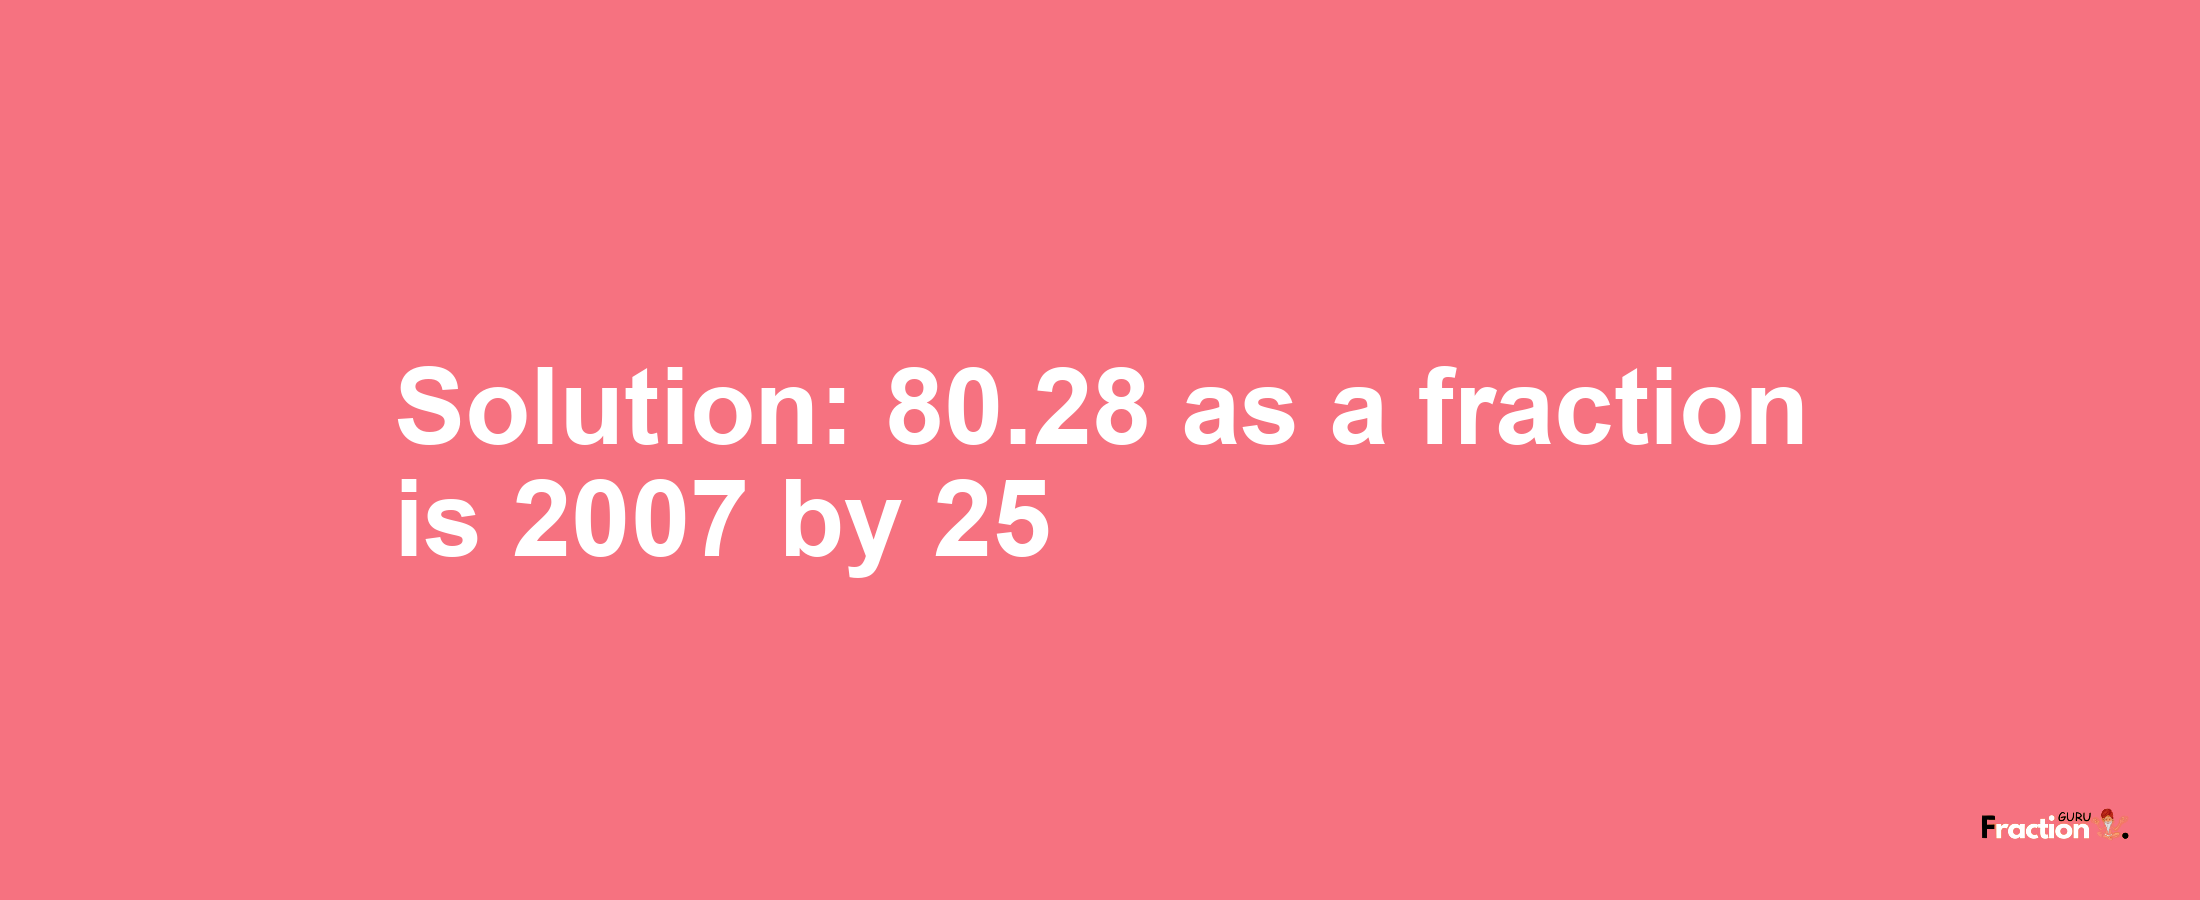 Solution:80.28 as a fraction is 2007/25